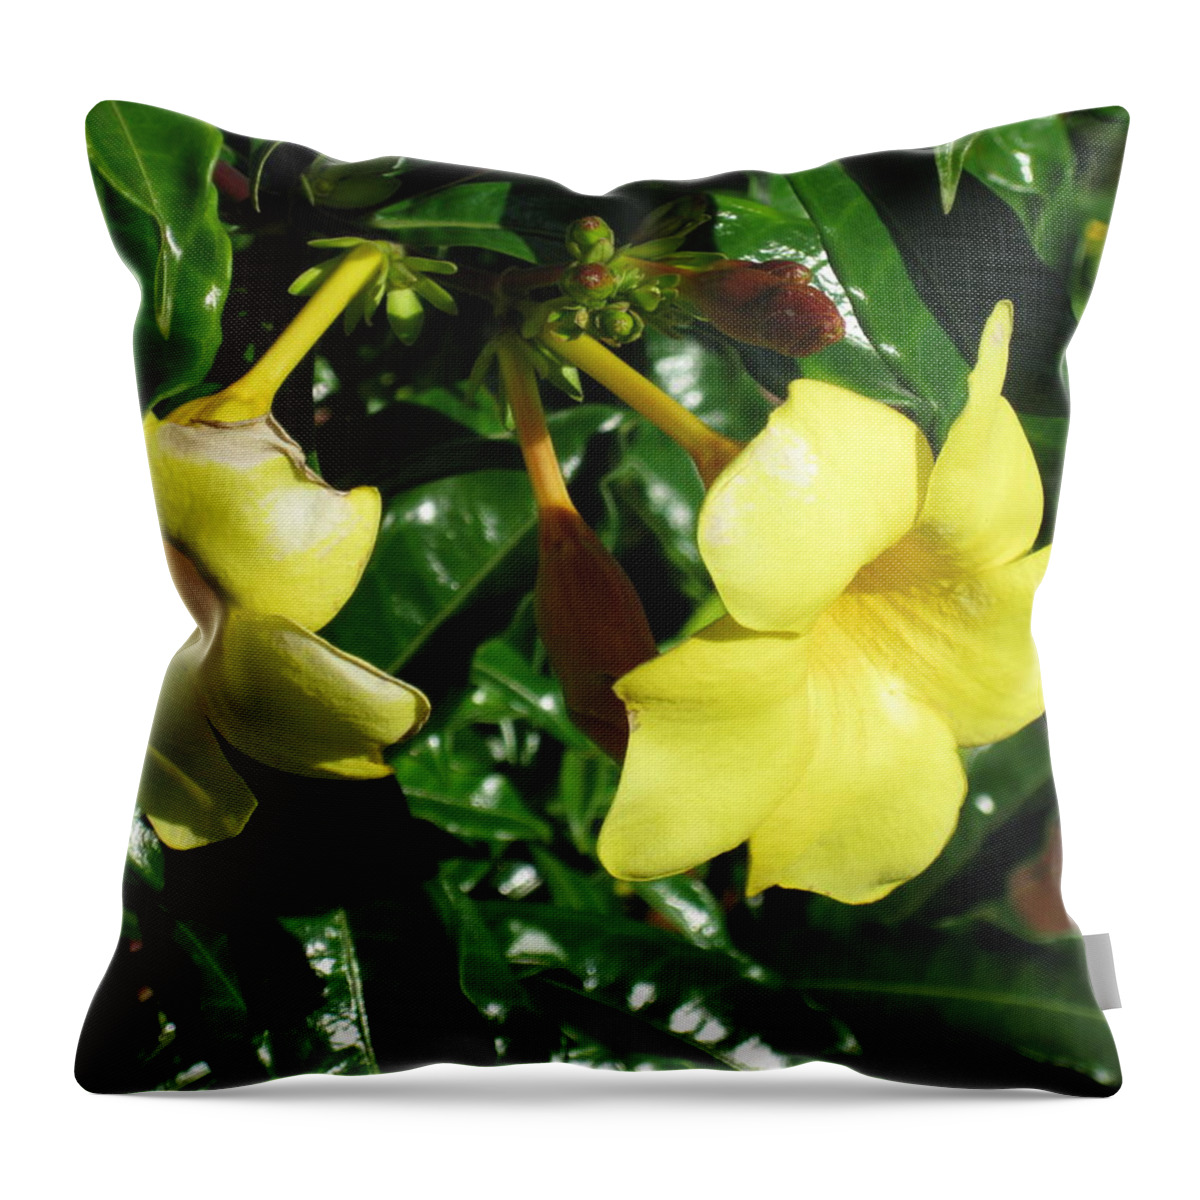  Throw Pillow featuring the photograph Yellow Trumpets by Ron Monsour